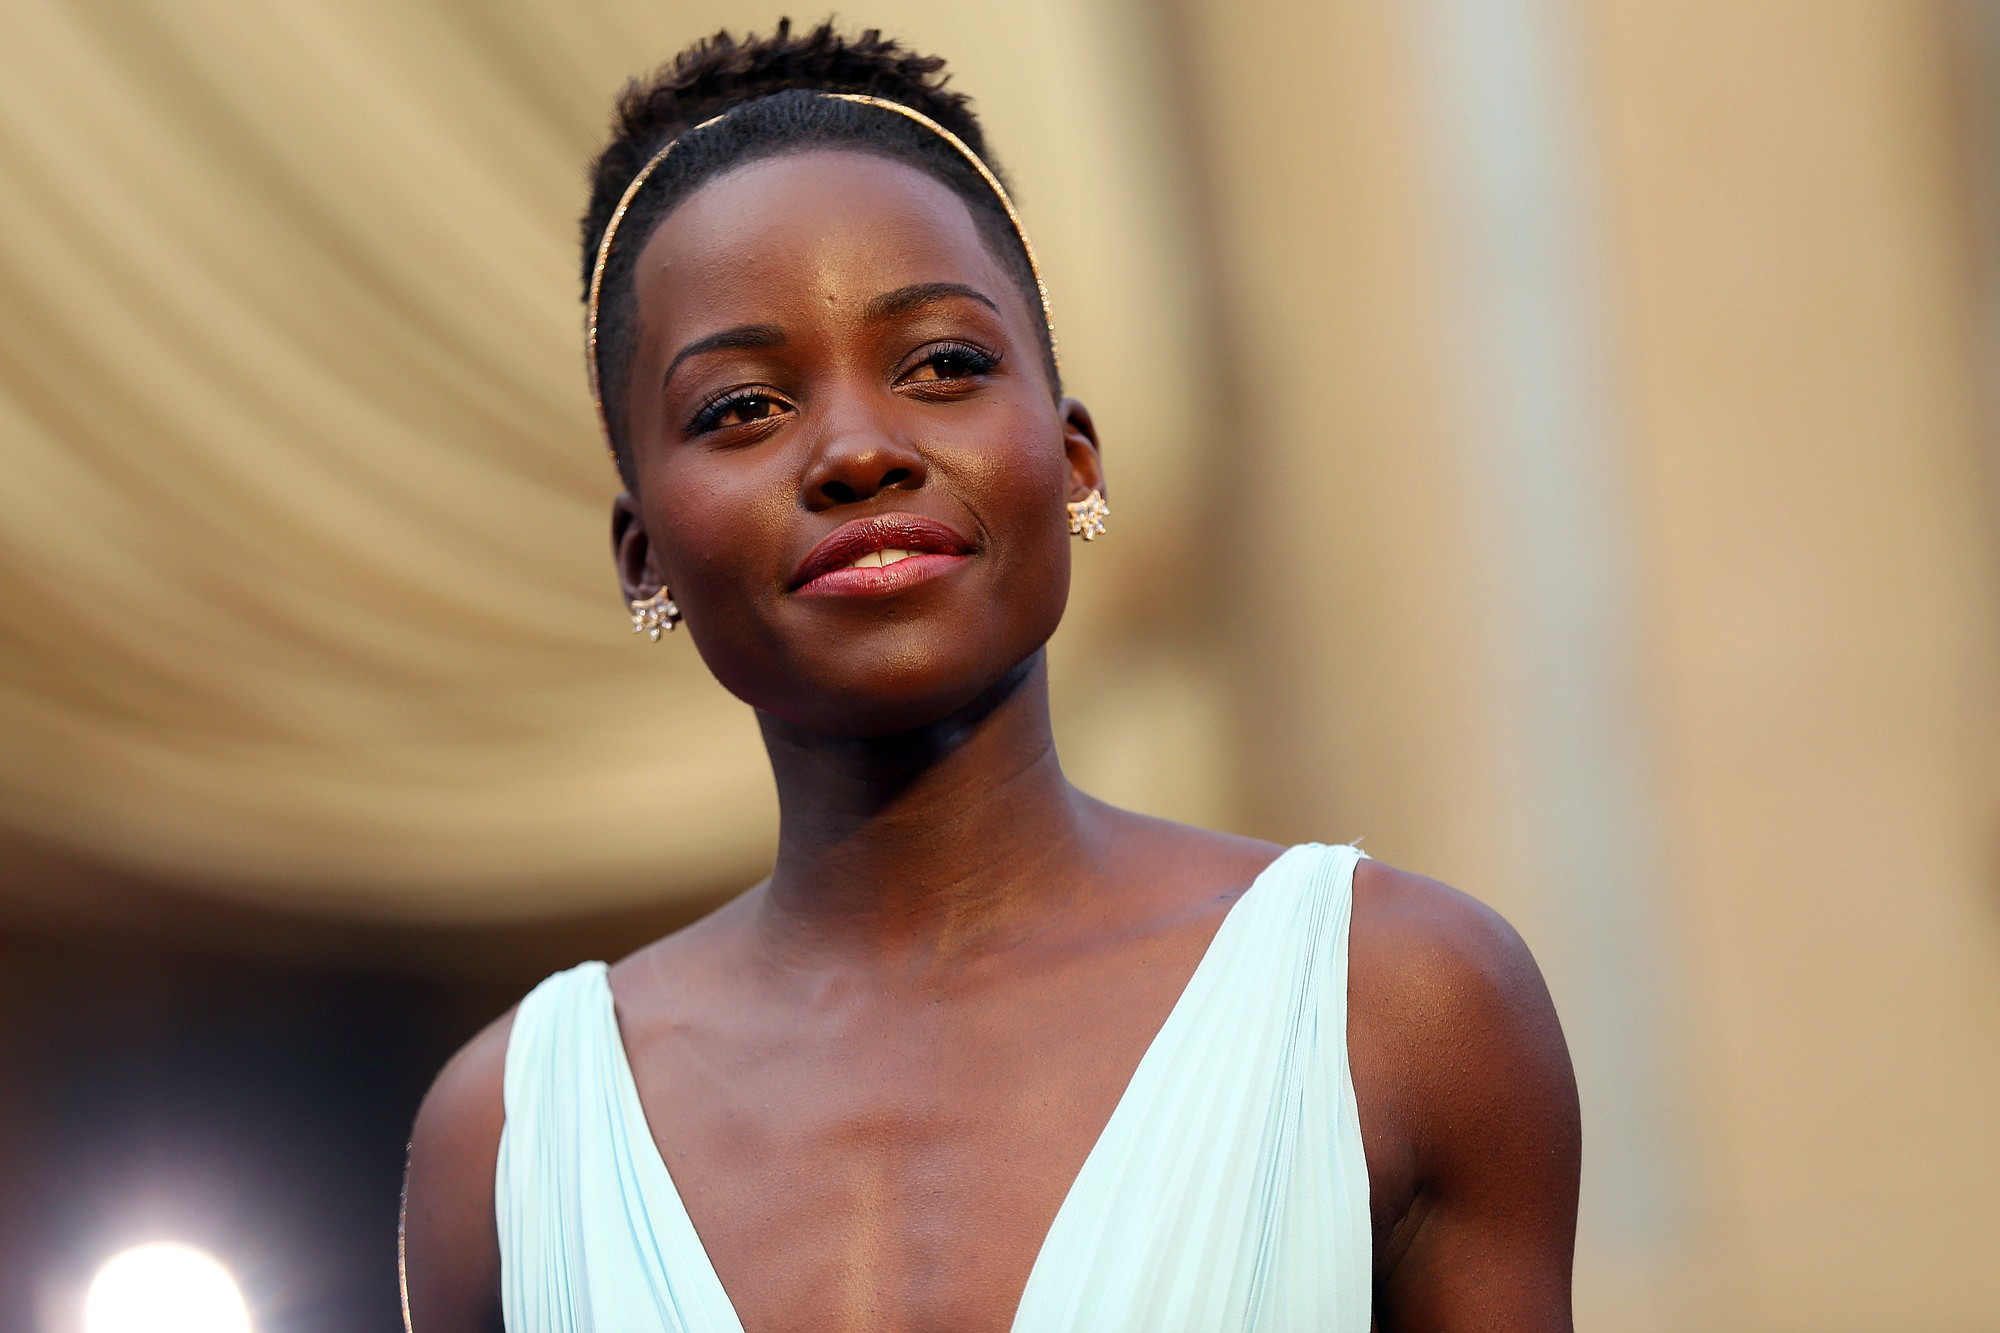 Invision files
Oscar winner Lupita Nyong'o is a rising star in Hollywood and the fashion world.